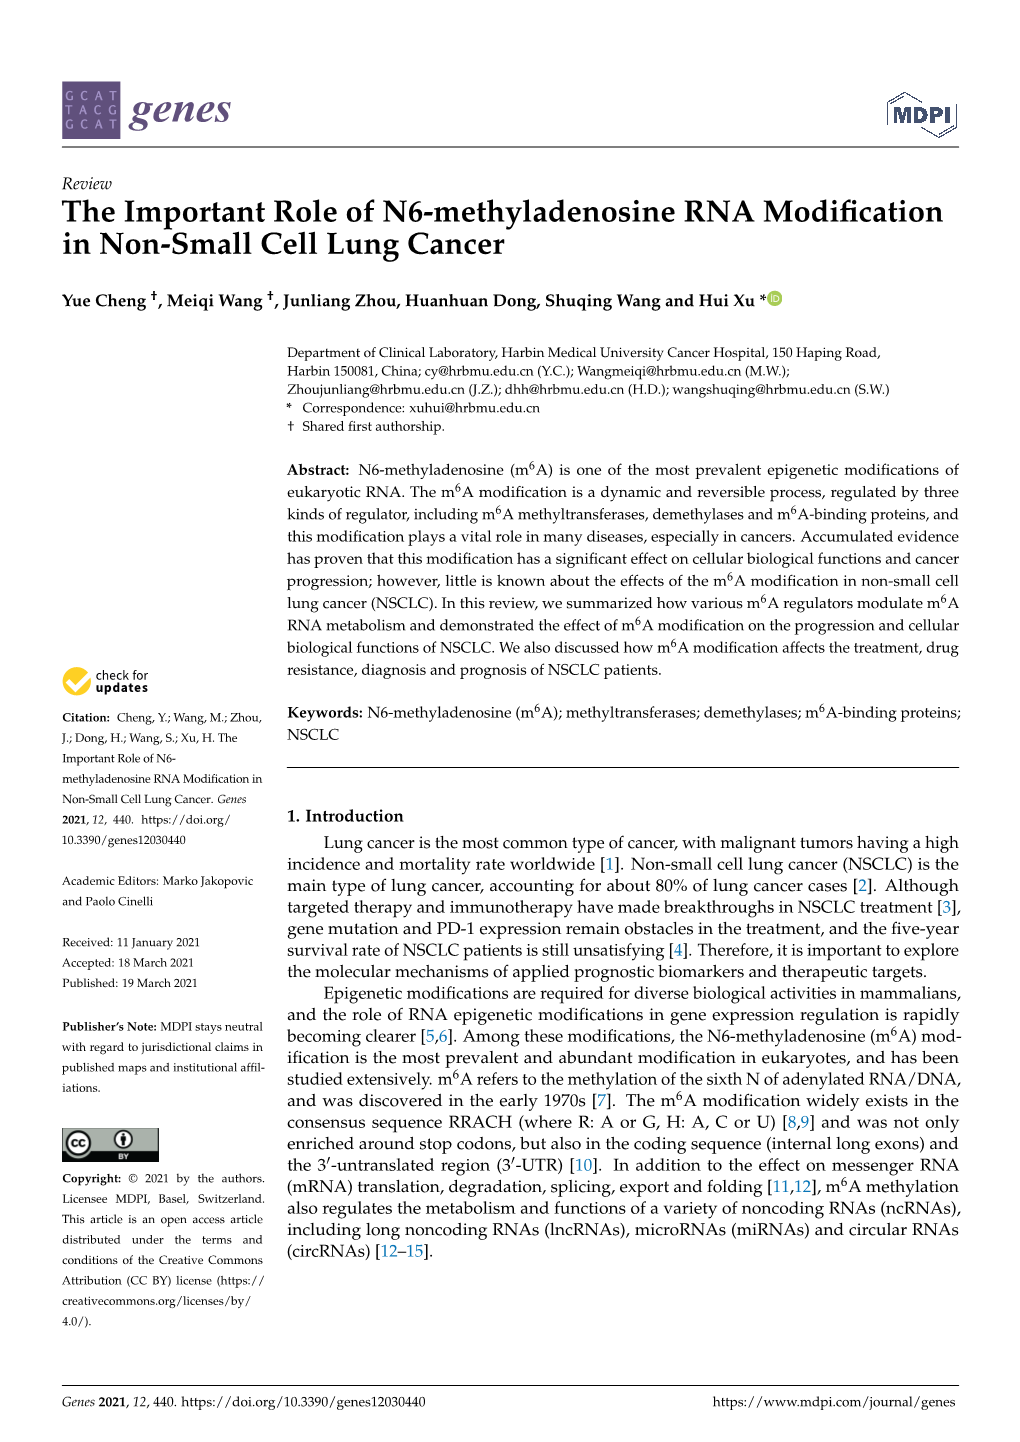 The Important Role of N6-Methyladenosine RNA Modiﬁcation in Non-Small Cell Lung Cancer